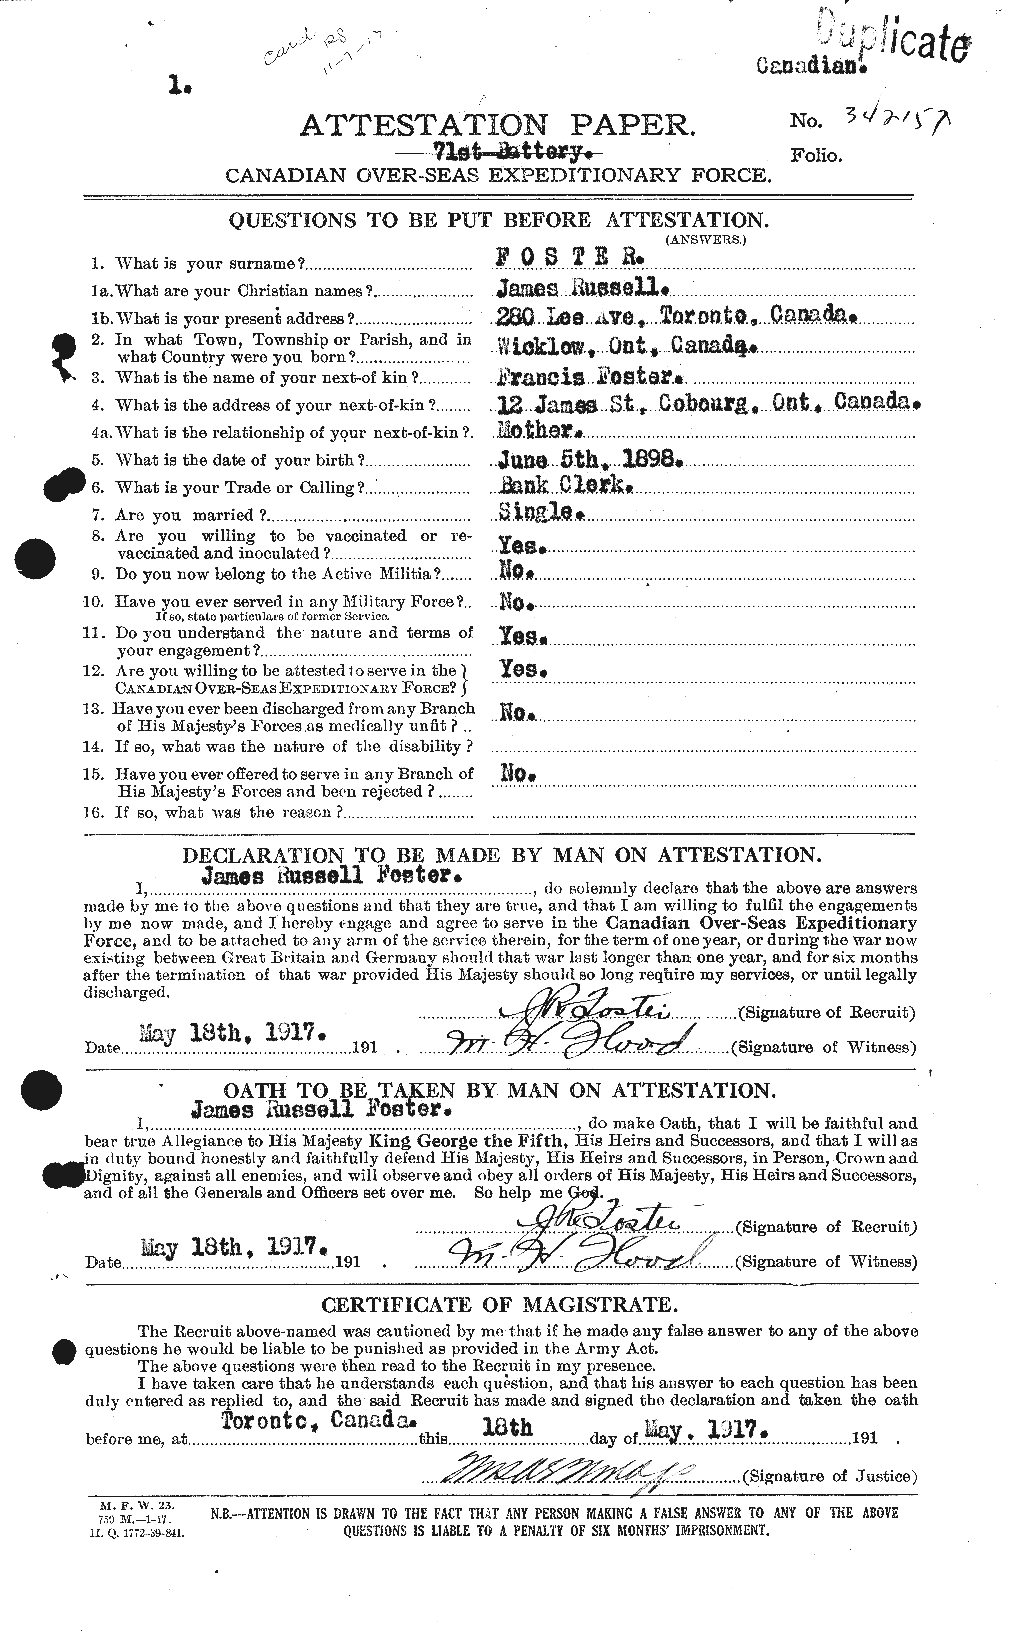 Personnel Records of the First World War - CEF 333317a